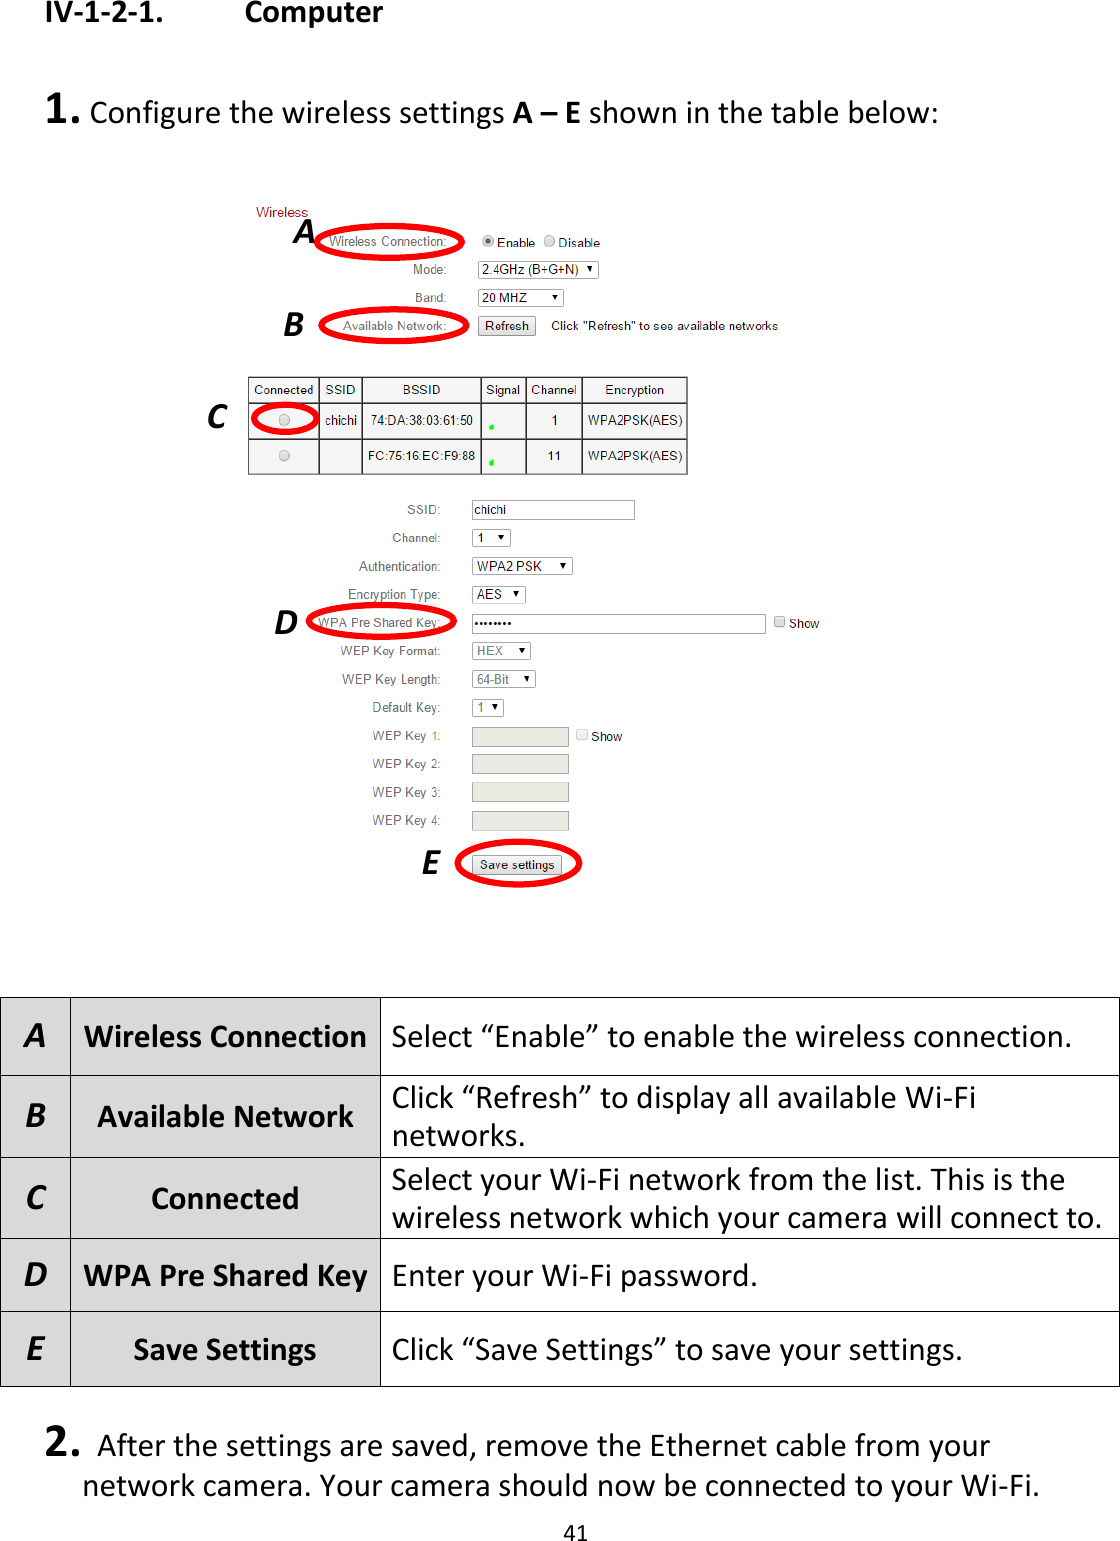 41  IV-1-2-1.    Computer  1.  Configure the wireless settings A – E shown in the table below:     2.   After the settings are saved, remove the Ethernet cable from your network camera. Your camera should now be connected to your Wi-Fi. A Wireless Connection Select “Enable” to enable the wireless connection. B Available Network Click “Refresh” to display all available Wi-Fi networks. C Connected Select your Wi-Fi network from the list. This is the wireless network which your camera will connect to. D WPA Pre Shared Key Enter your Wi-Fi password. E Save Settings Click “Save Settings” to save your settings. A  C D E B 